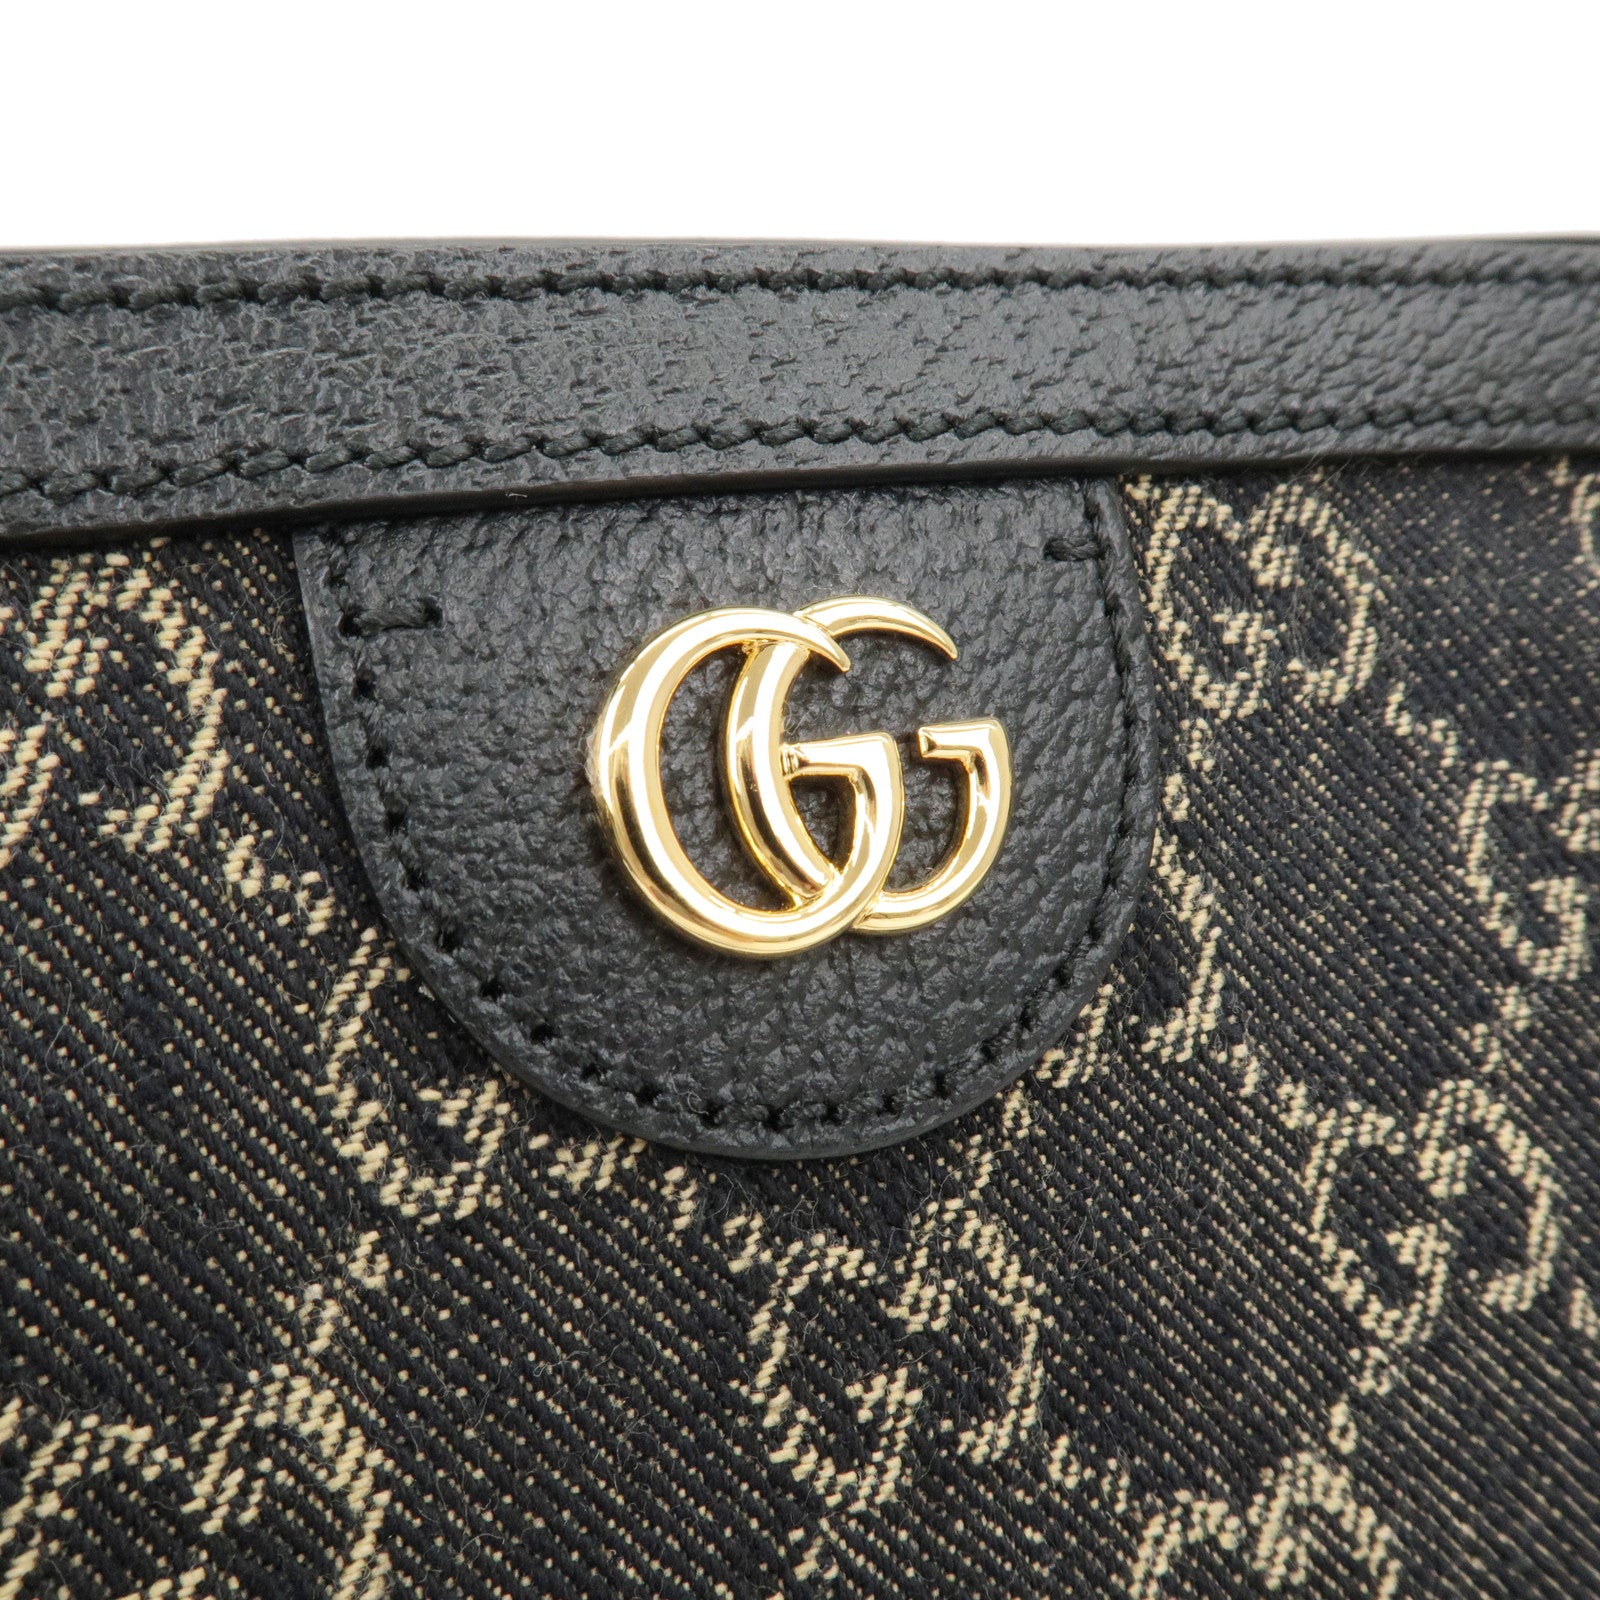 Bag - Black - Leather - Ophidia - шаль gucci шовк - GG - 631685 – dct -  GUCCI - ep_vintage luxury Store - Denim - Supreme - Tote